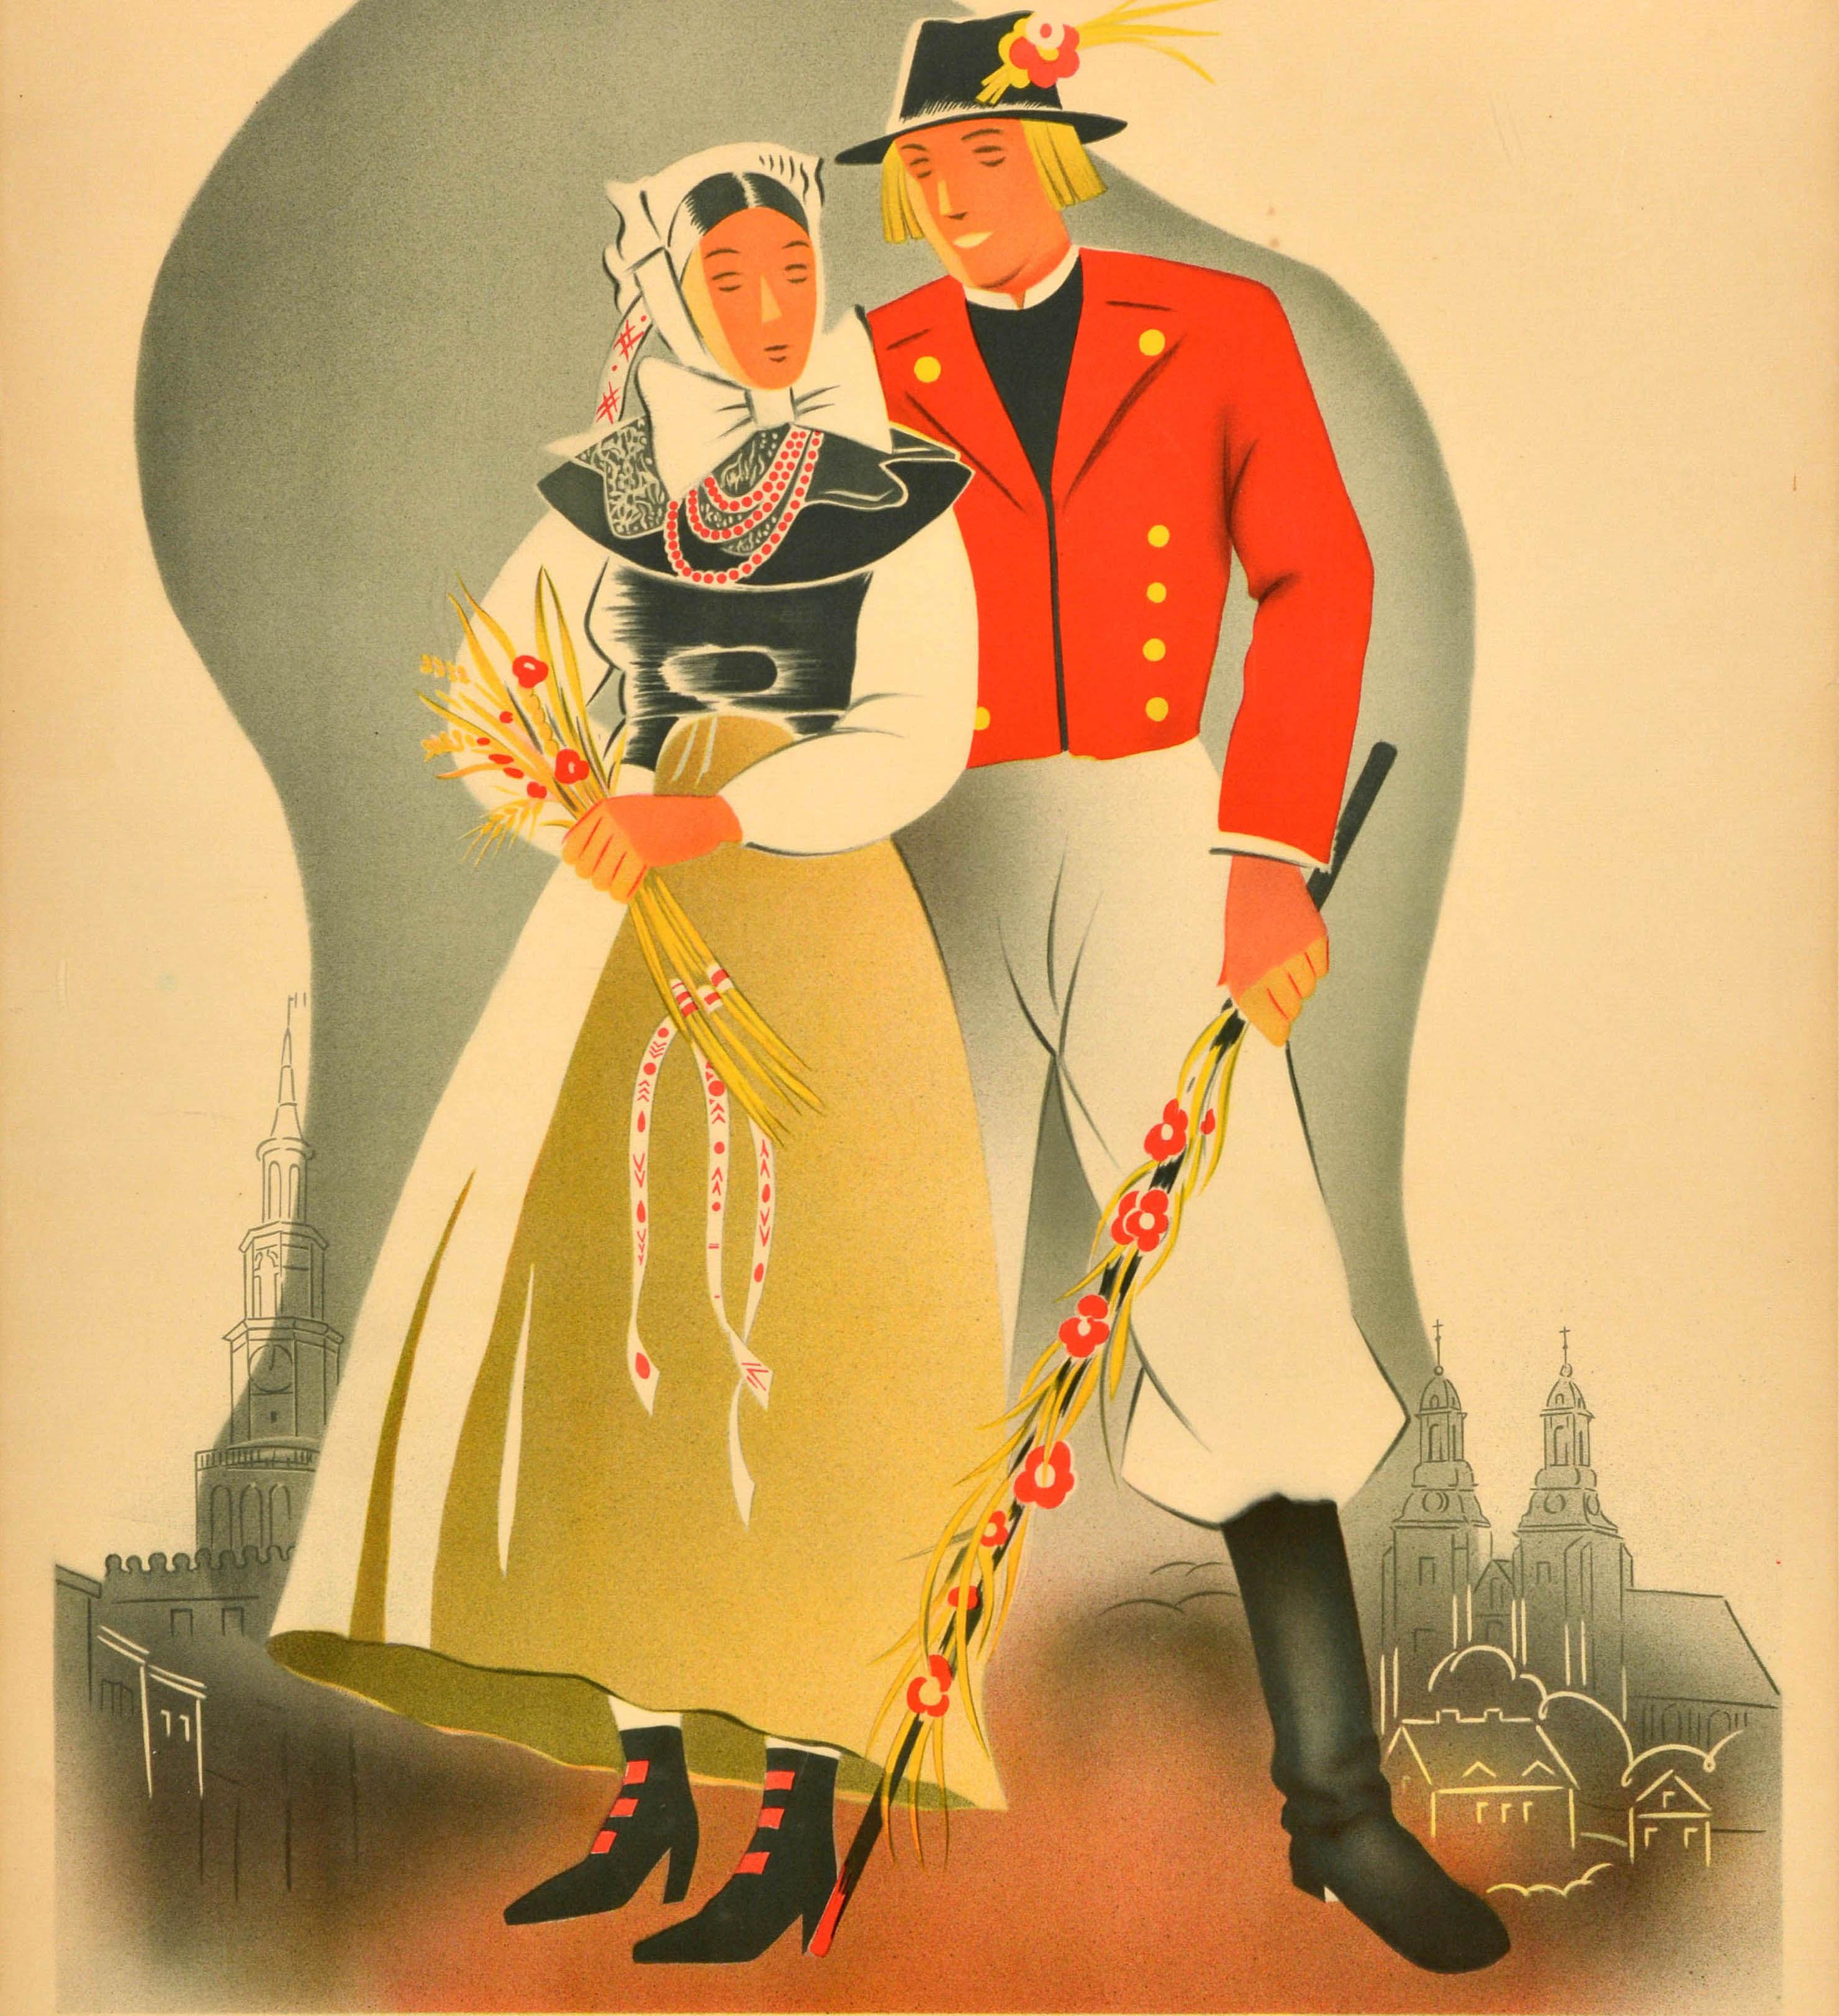 Original vintage travel poster for Pologne Poland Polen Visitez Visit Besuchet Poznan et ses Environs and Environs und Umgebung featuring a couple in traditional clothing holding flowers and wheat with an outline of the city's historical buildings